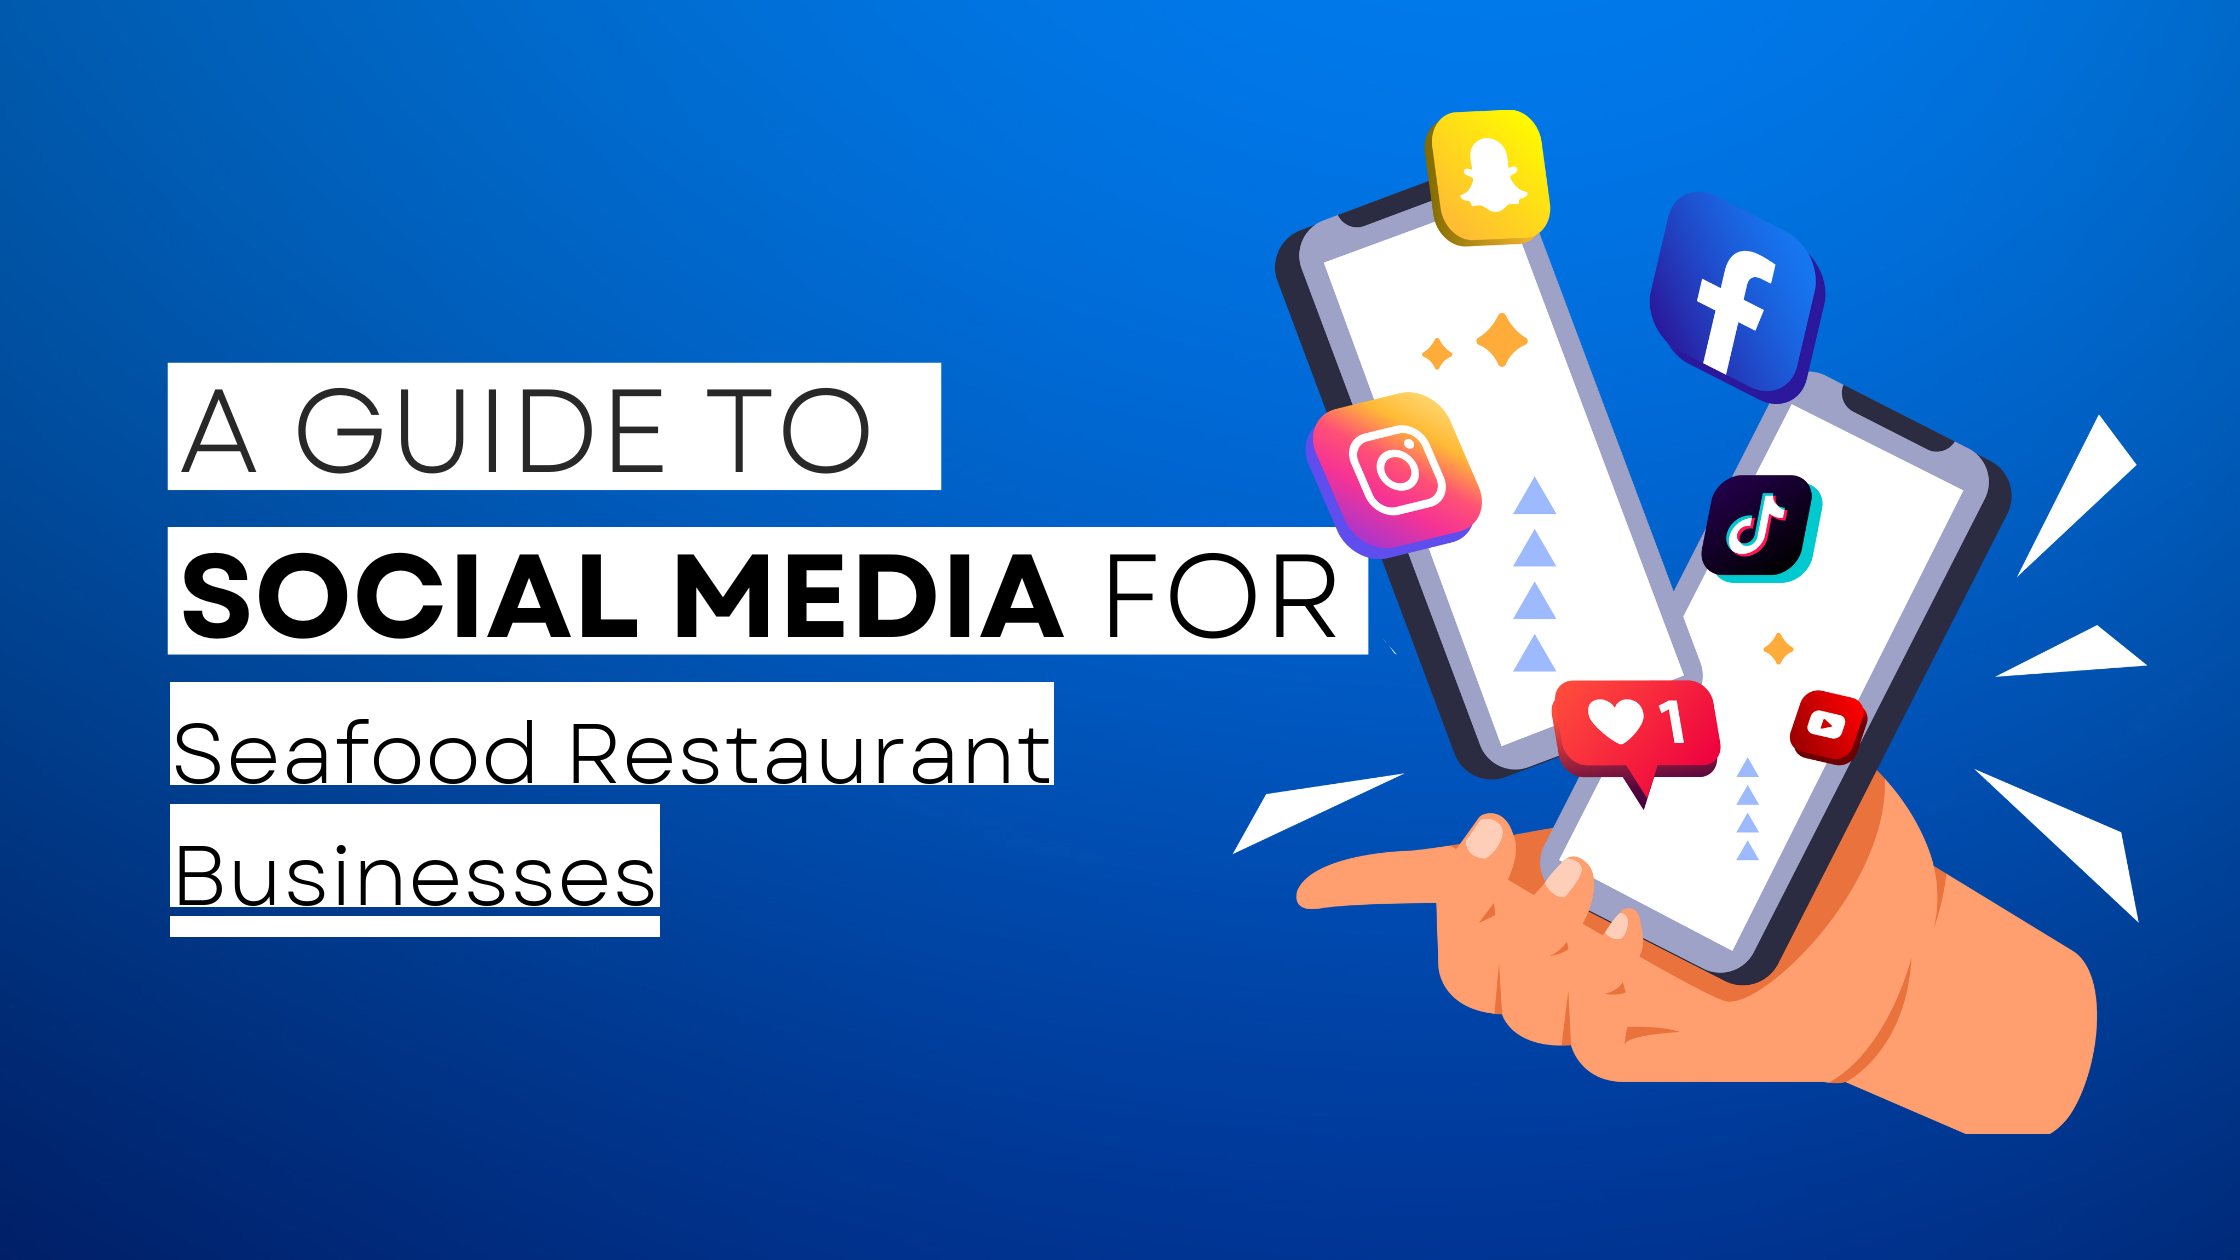 How to start Seafood Restaurant on social media